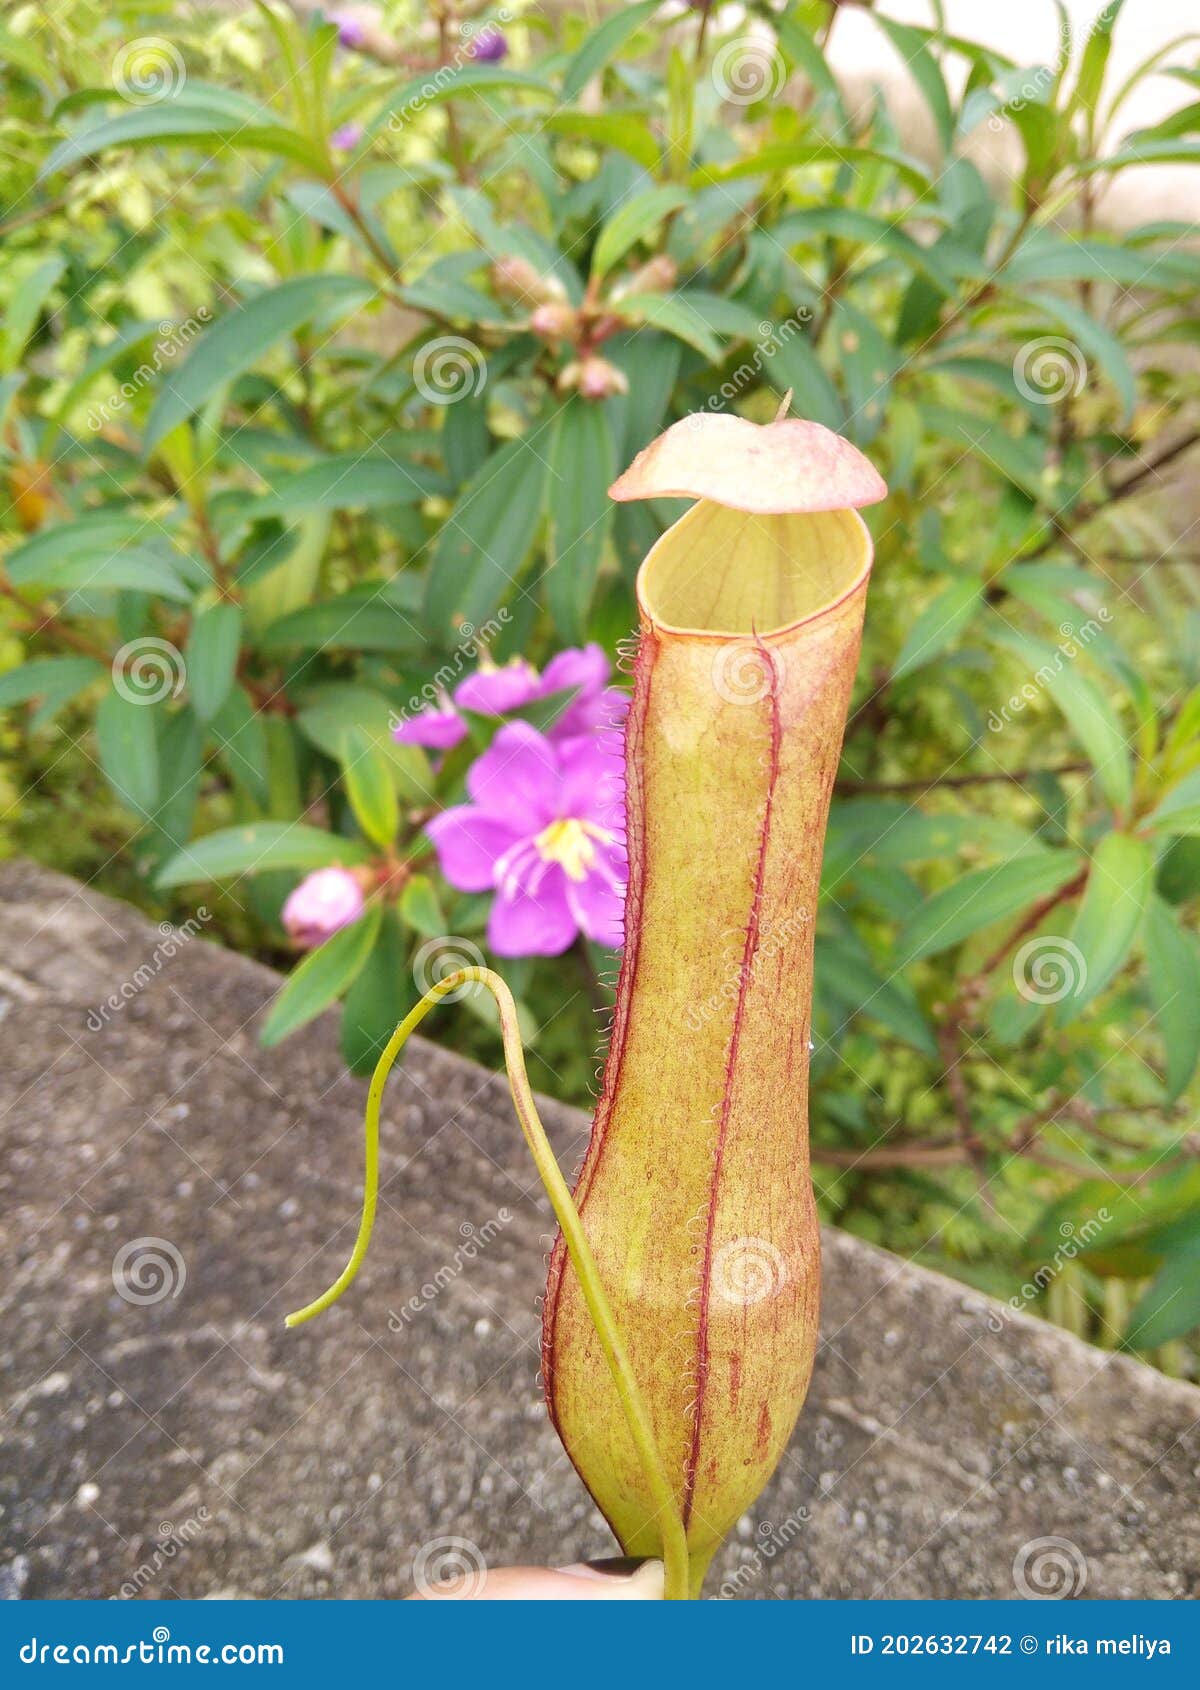 carnivora plant from indonesia